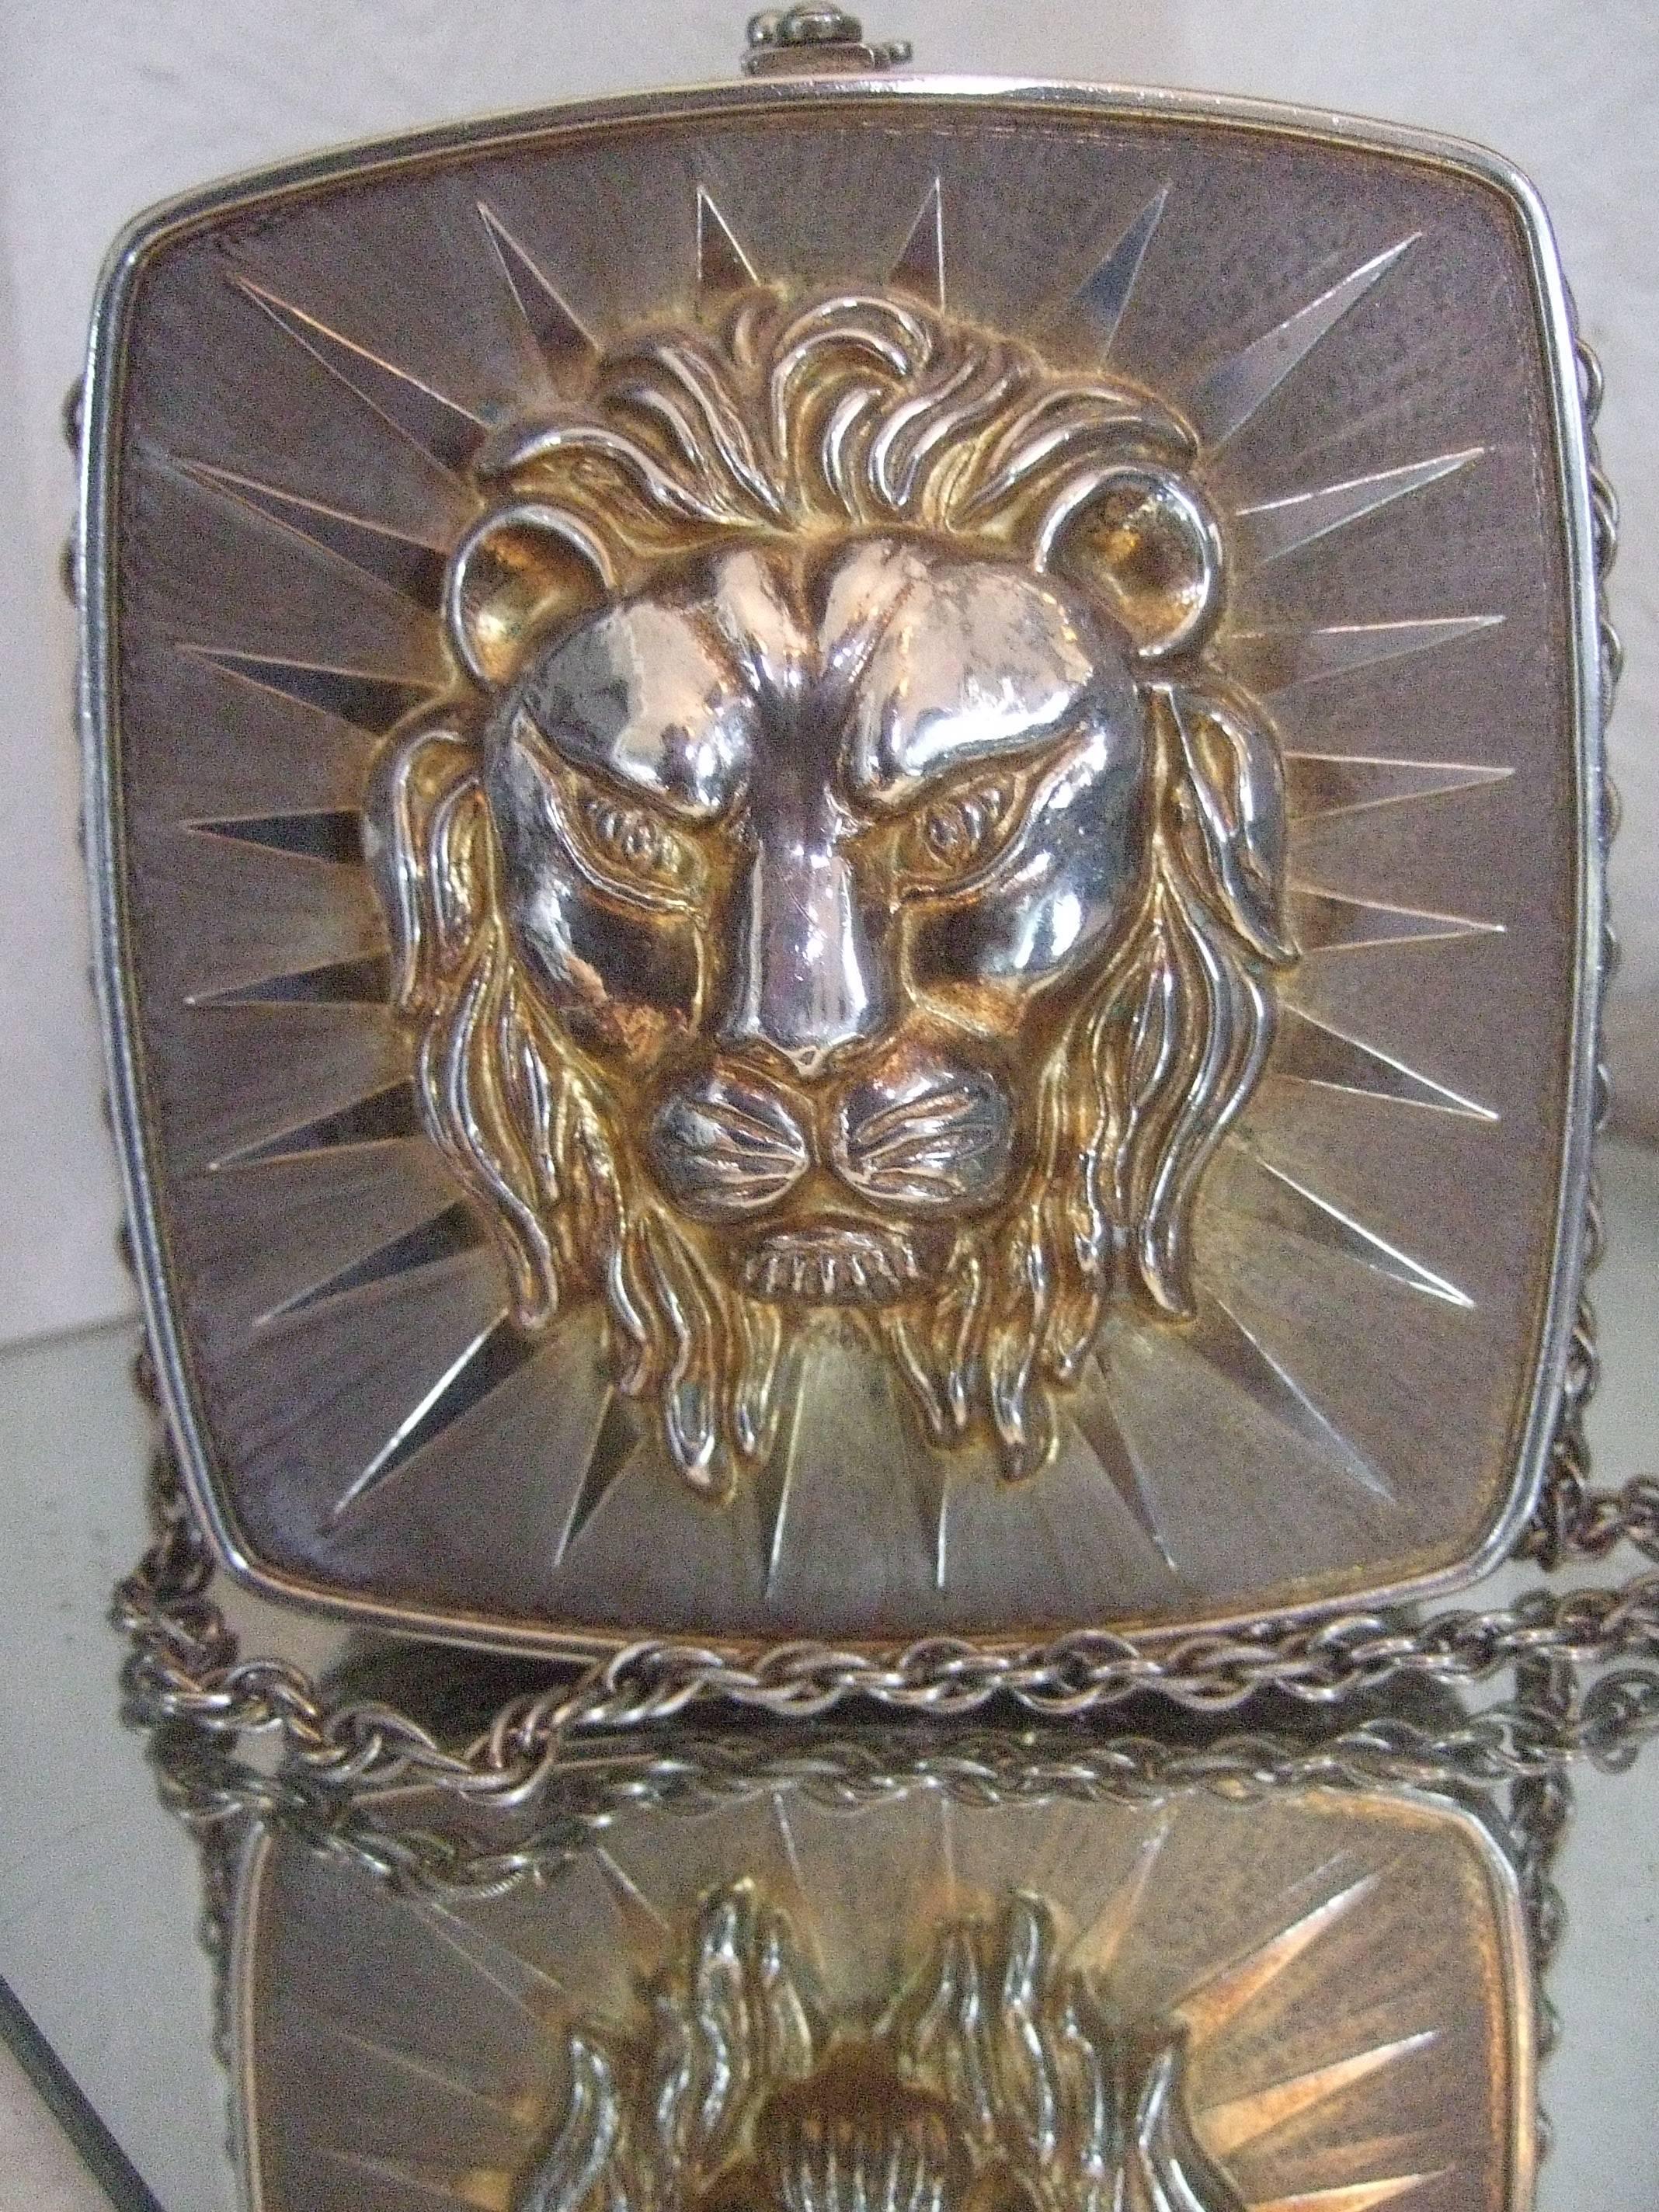 Ornate metal lion emblem evening bag Made in Italy 
The metal evening bag is decorated with a large
scale lion head replicated on both exterior sides

Etched on both exterior panels are radiating 
triangular beams that frame both lion